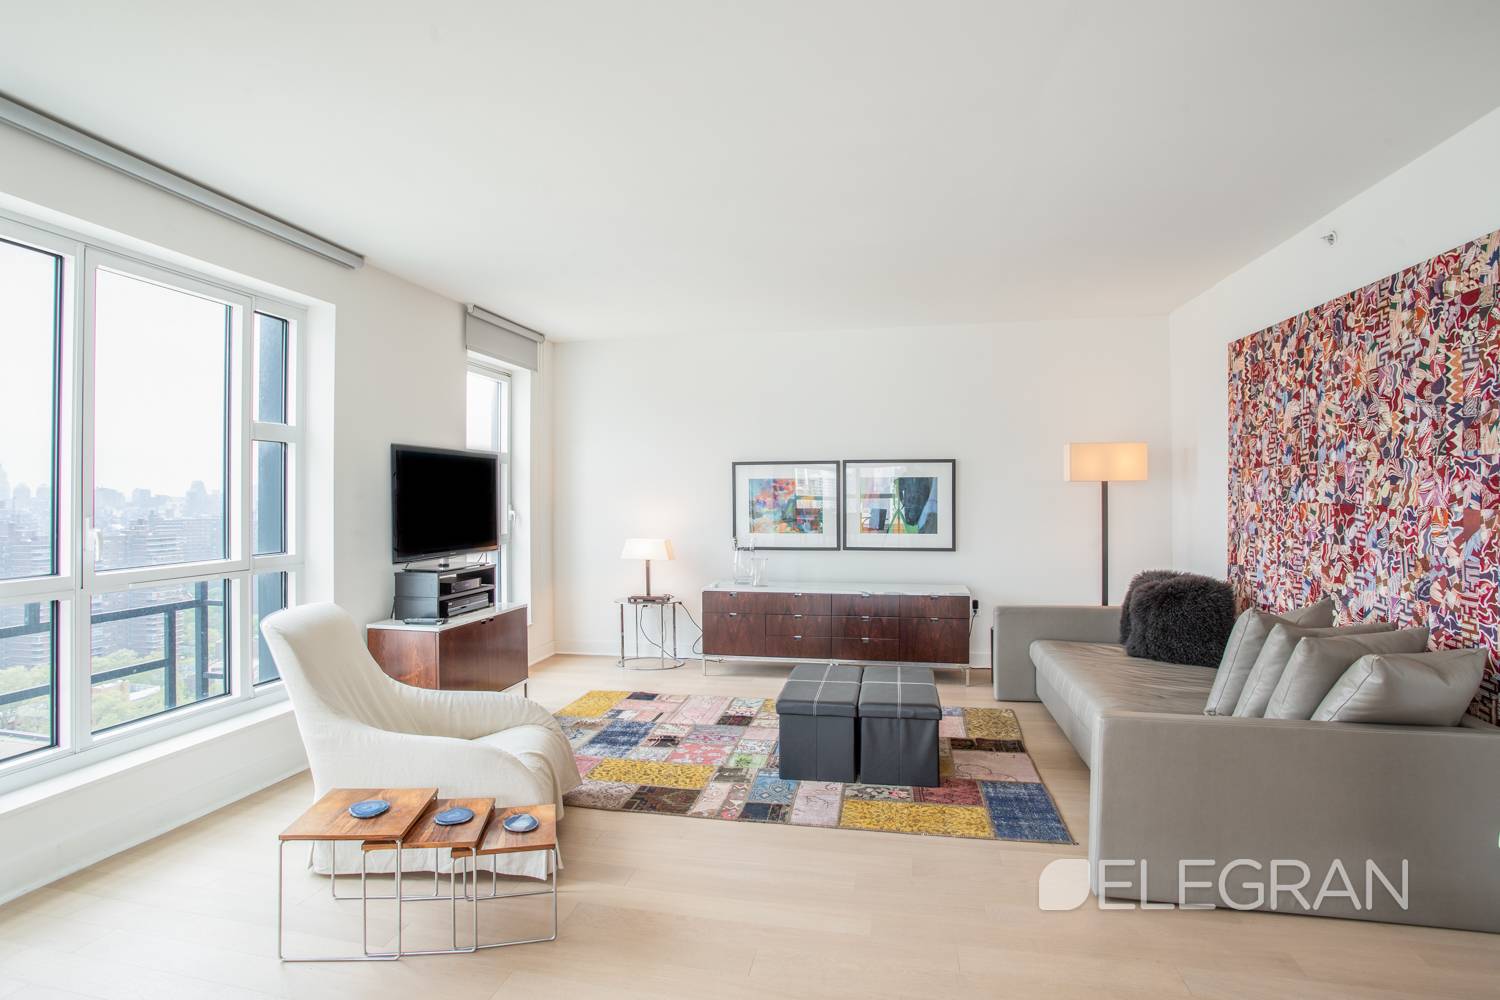 A spacious two bedroom residence is now available in West Chelsea just steps from the High Line.